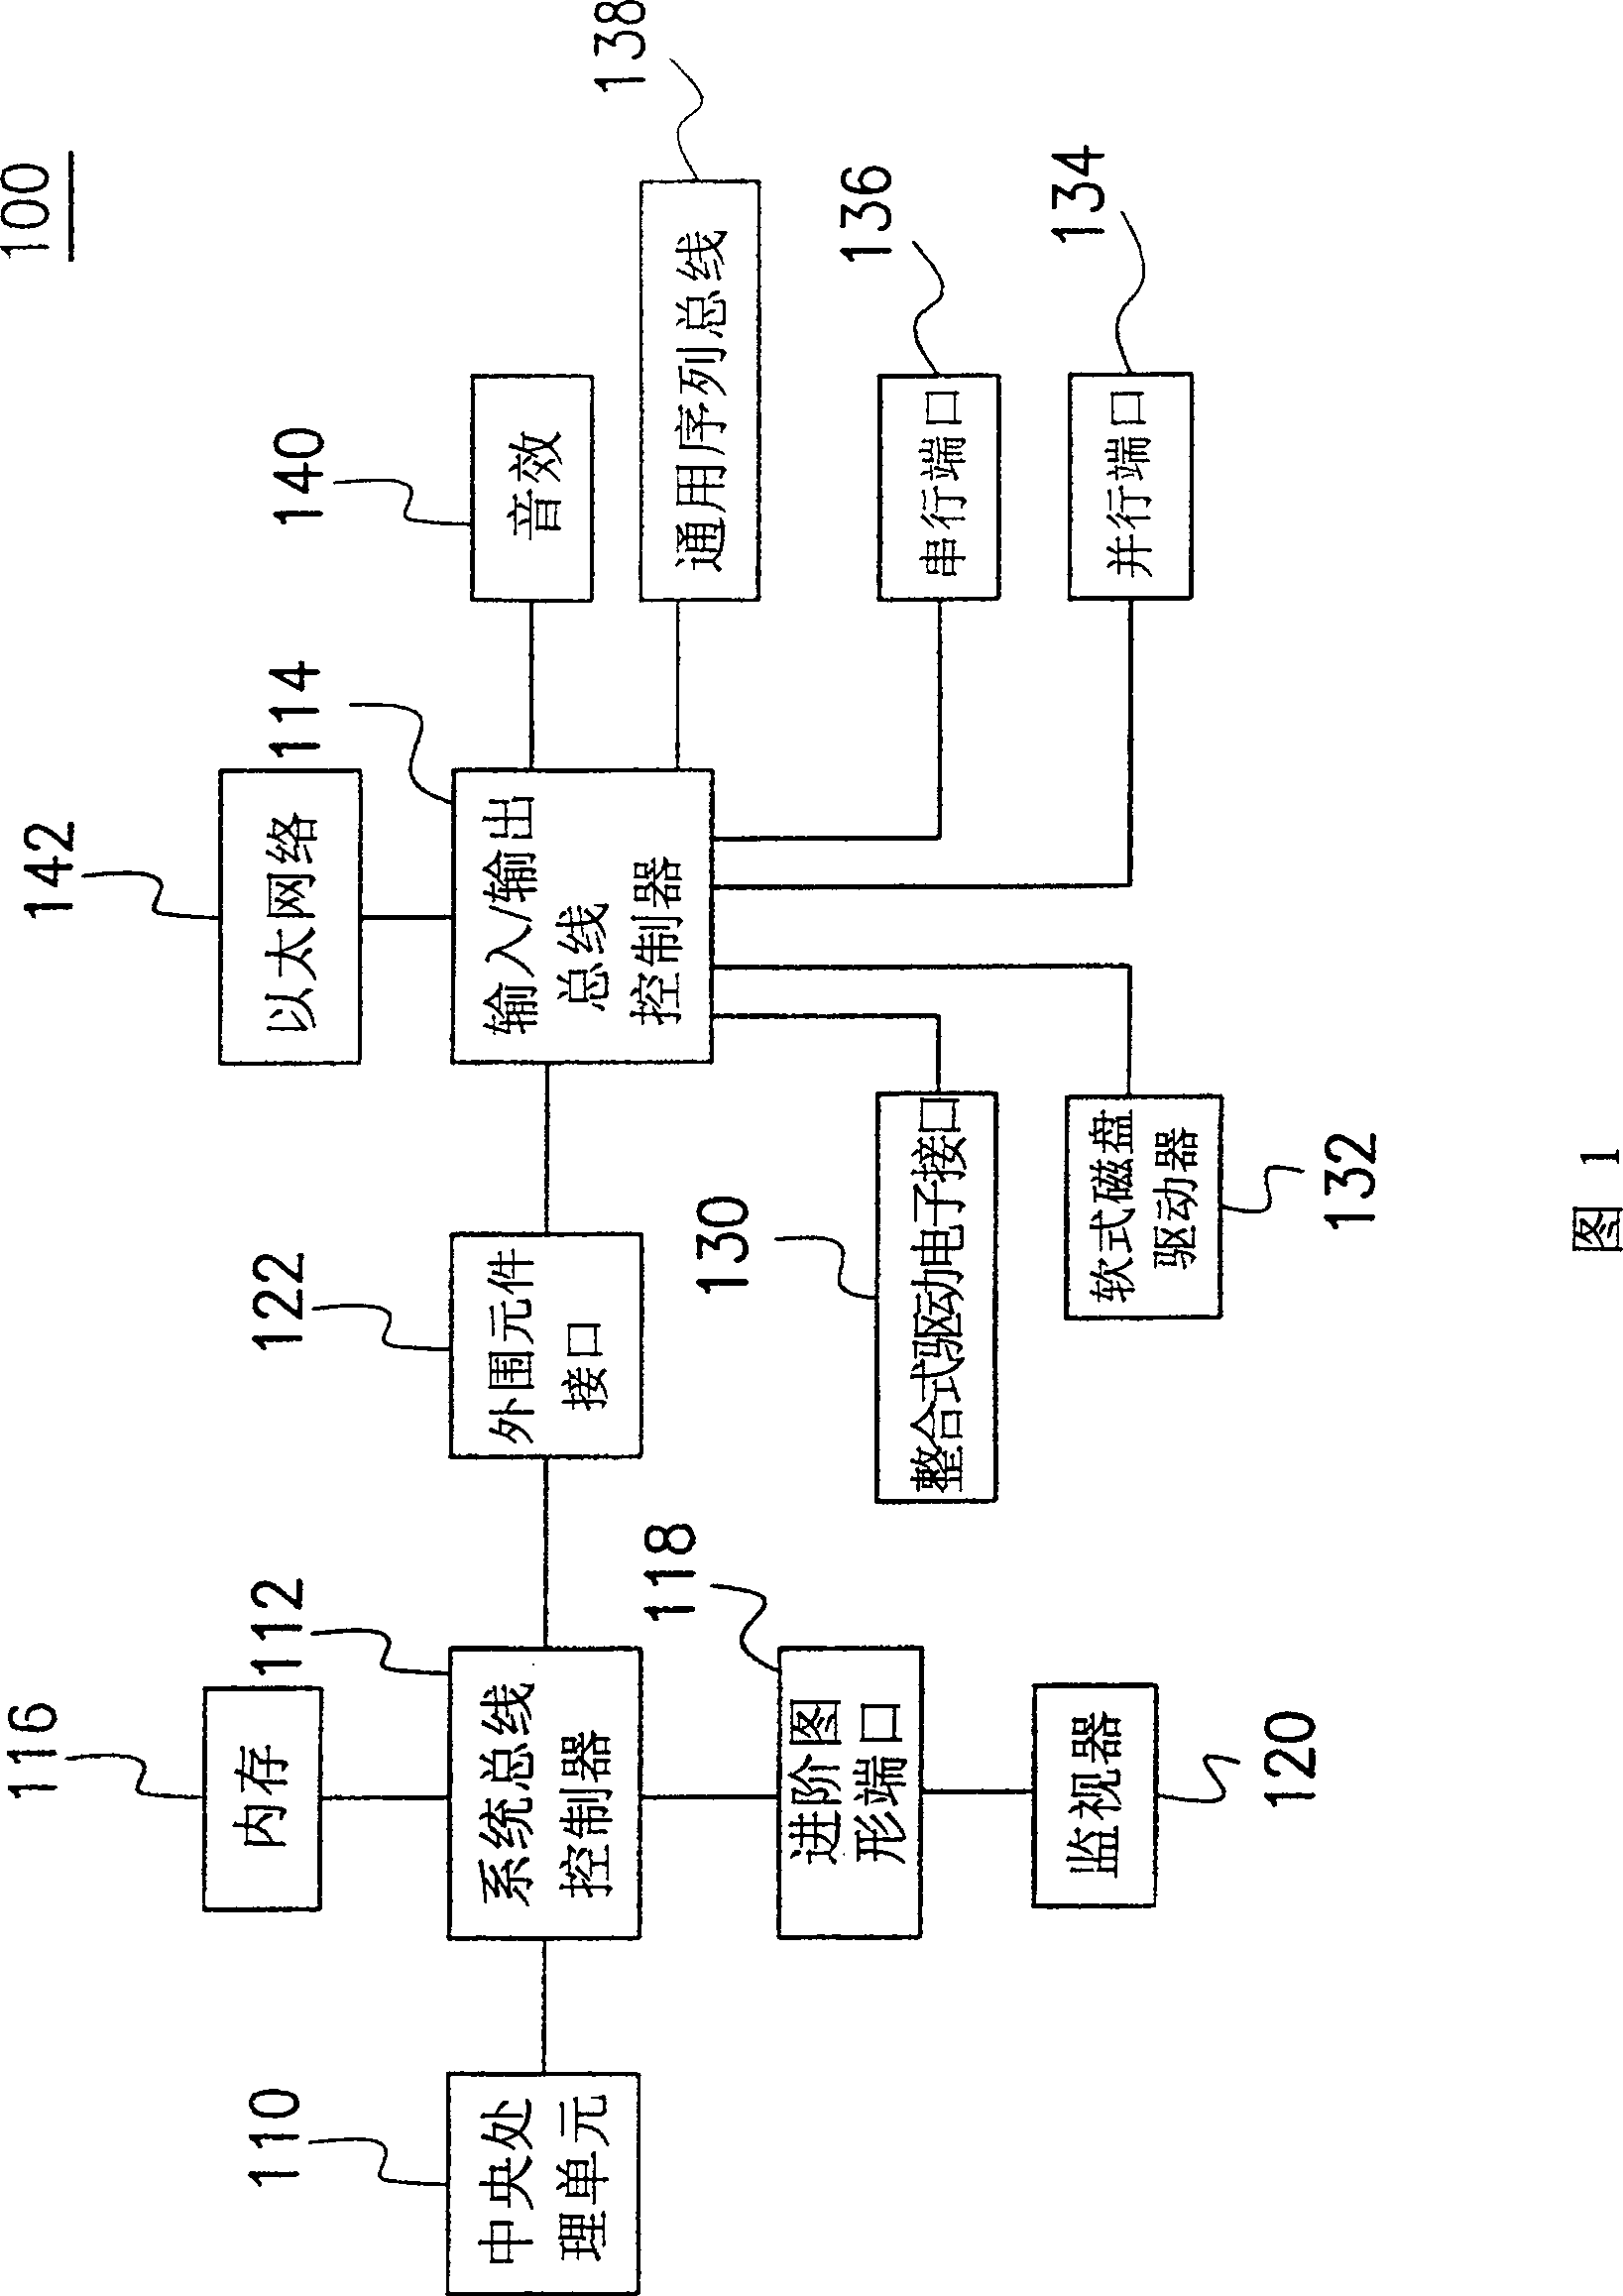 Automatic test system, device and method for ICs and overall system